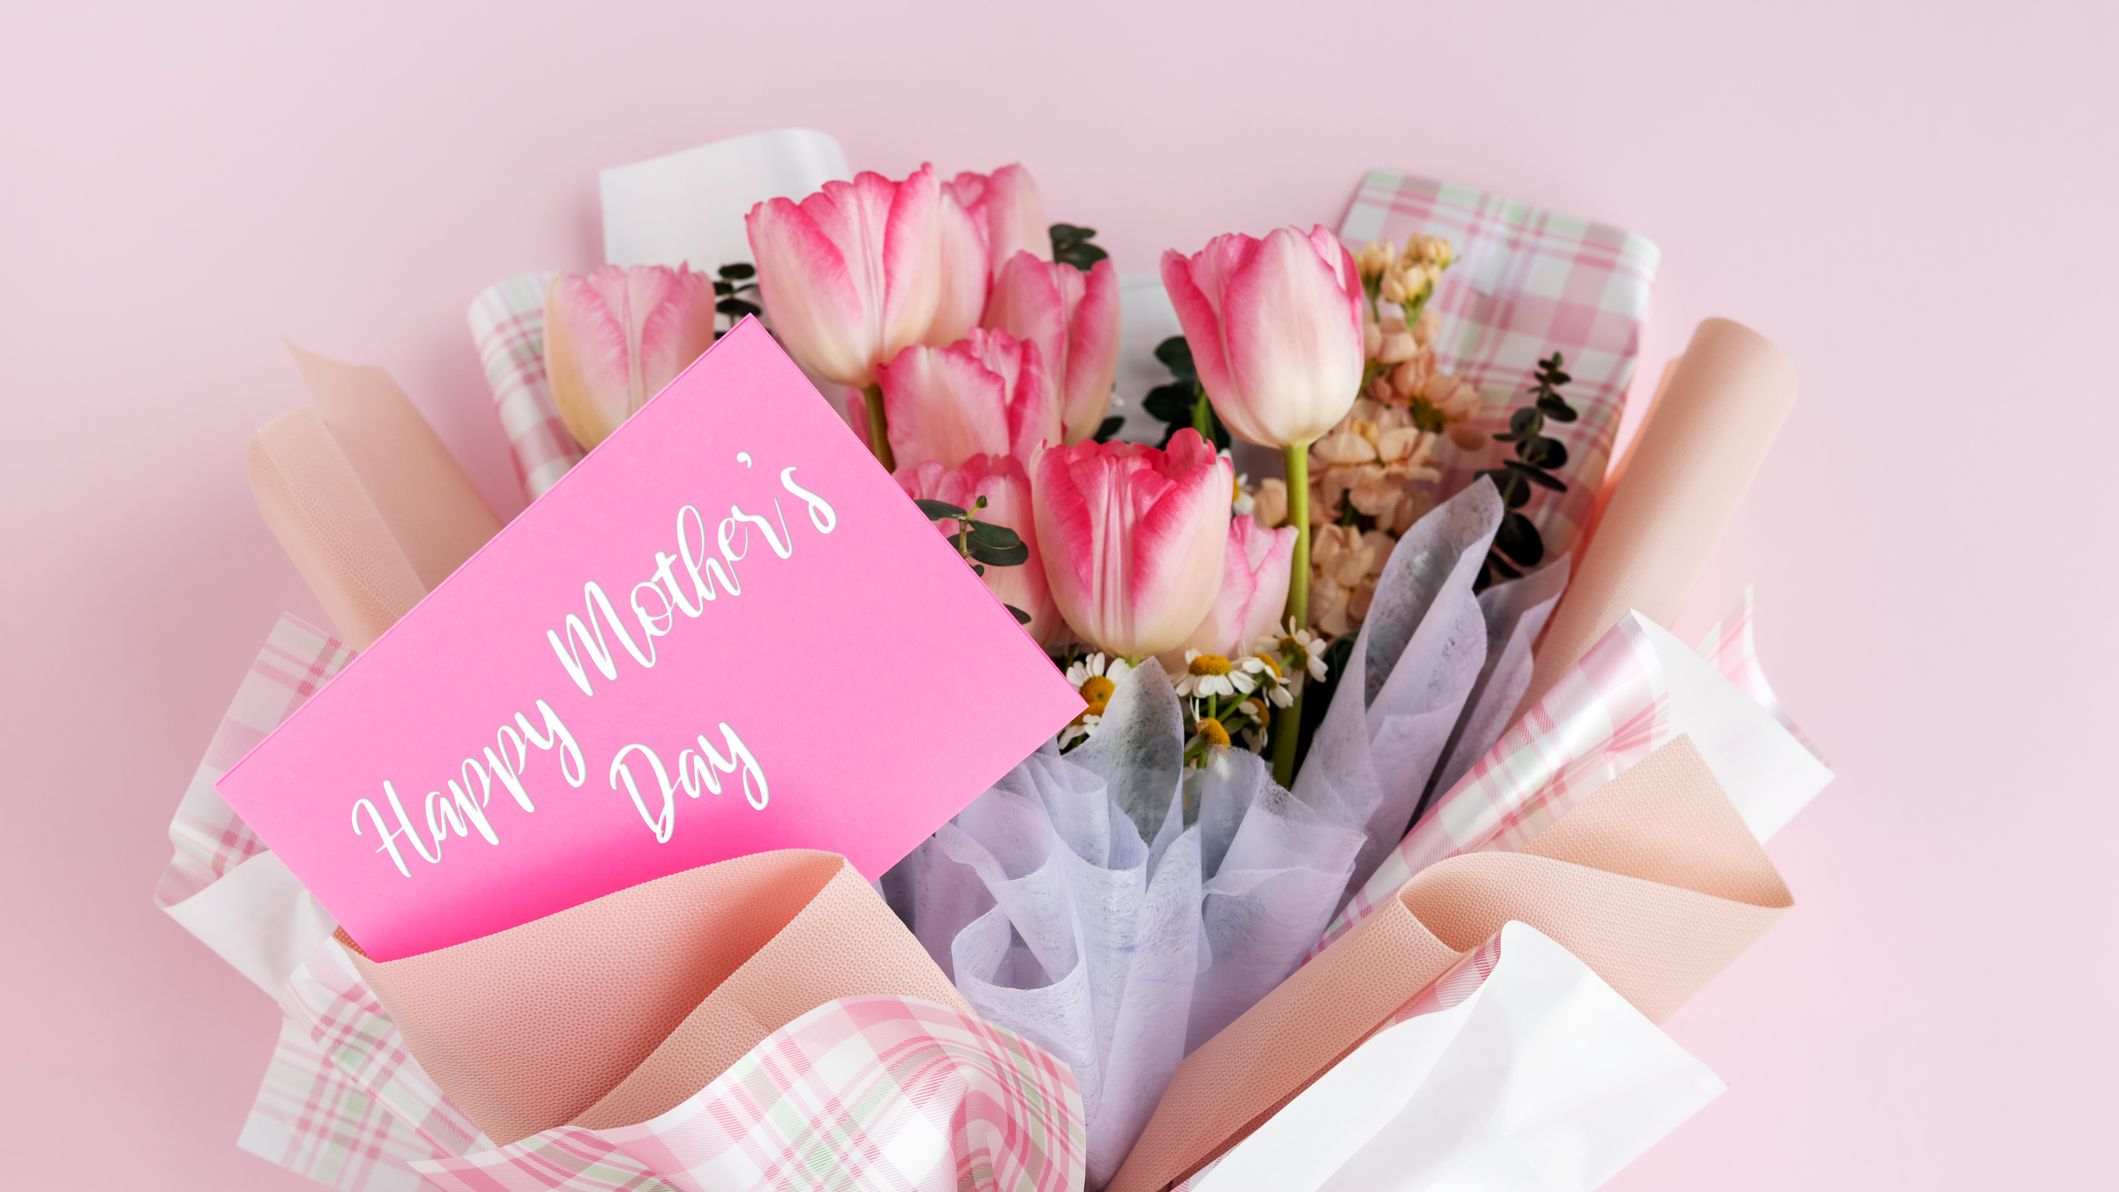 https://hips.hearstapps.com/hmg-prod/images/mother-s-day-messages-tulip-bouquet-642f15beb2596.jpg?crop=1xw:0.8423586572438162xh;center,top